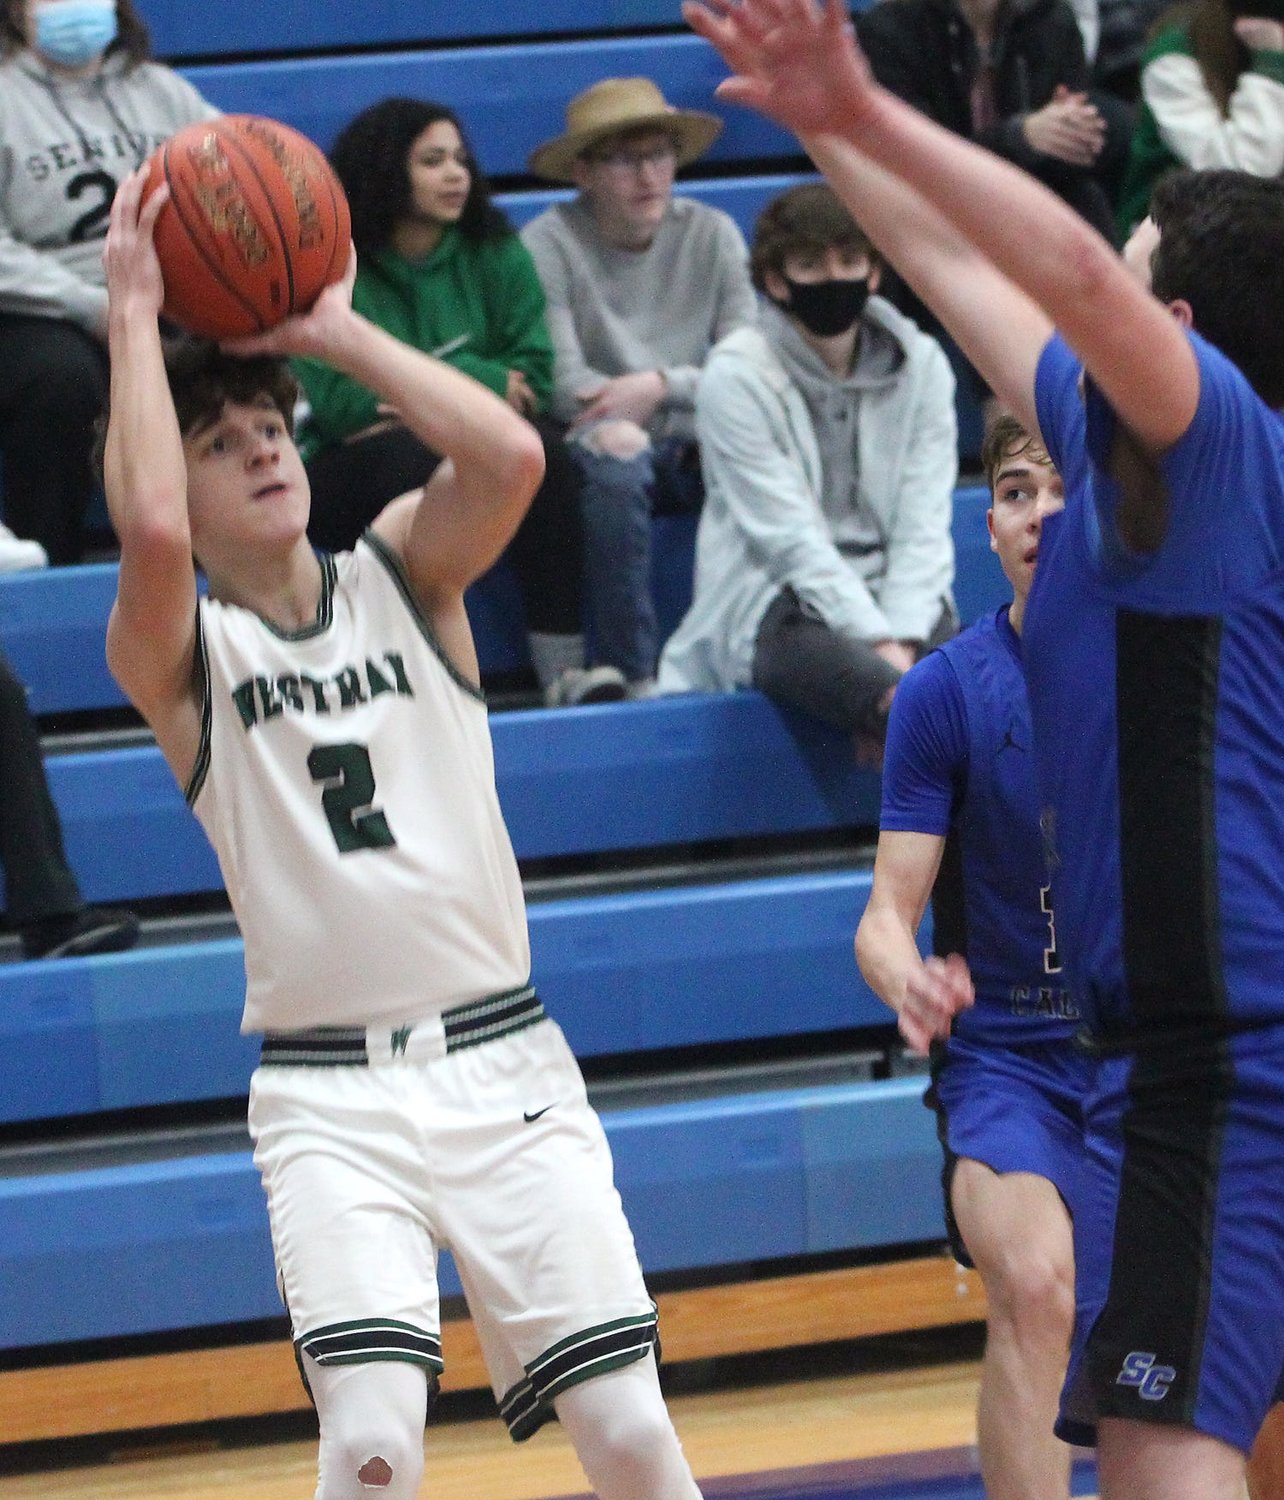 Westran junior guard Leyton Bain and the Hornet boys basketball team lost the Sturgeon Invitational championship game Saturday 63-53 to Salisbury. Bain nailed four threes en route to scoring 18 points in a losing effort for the Hornets.